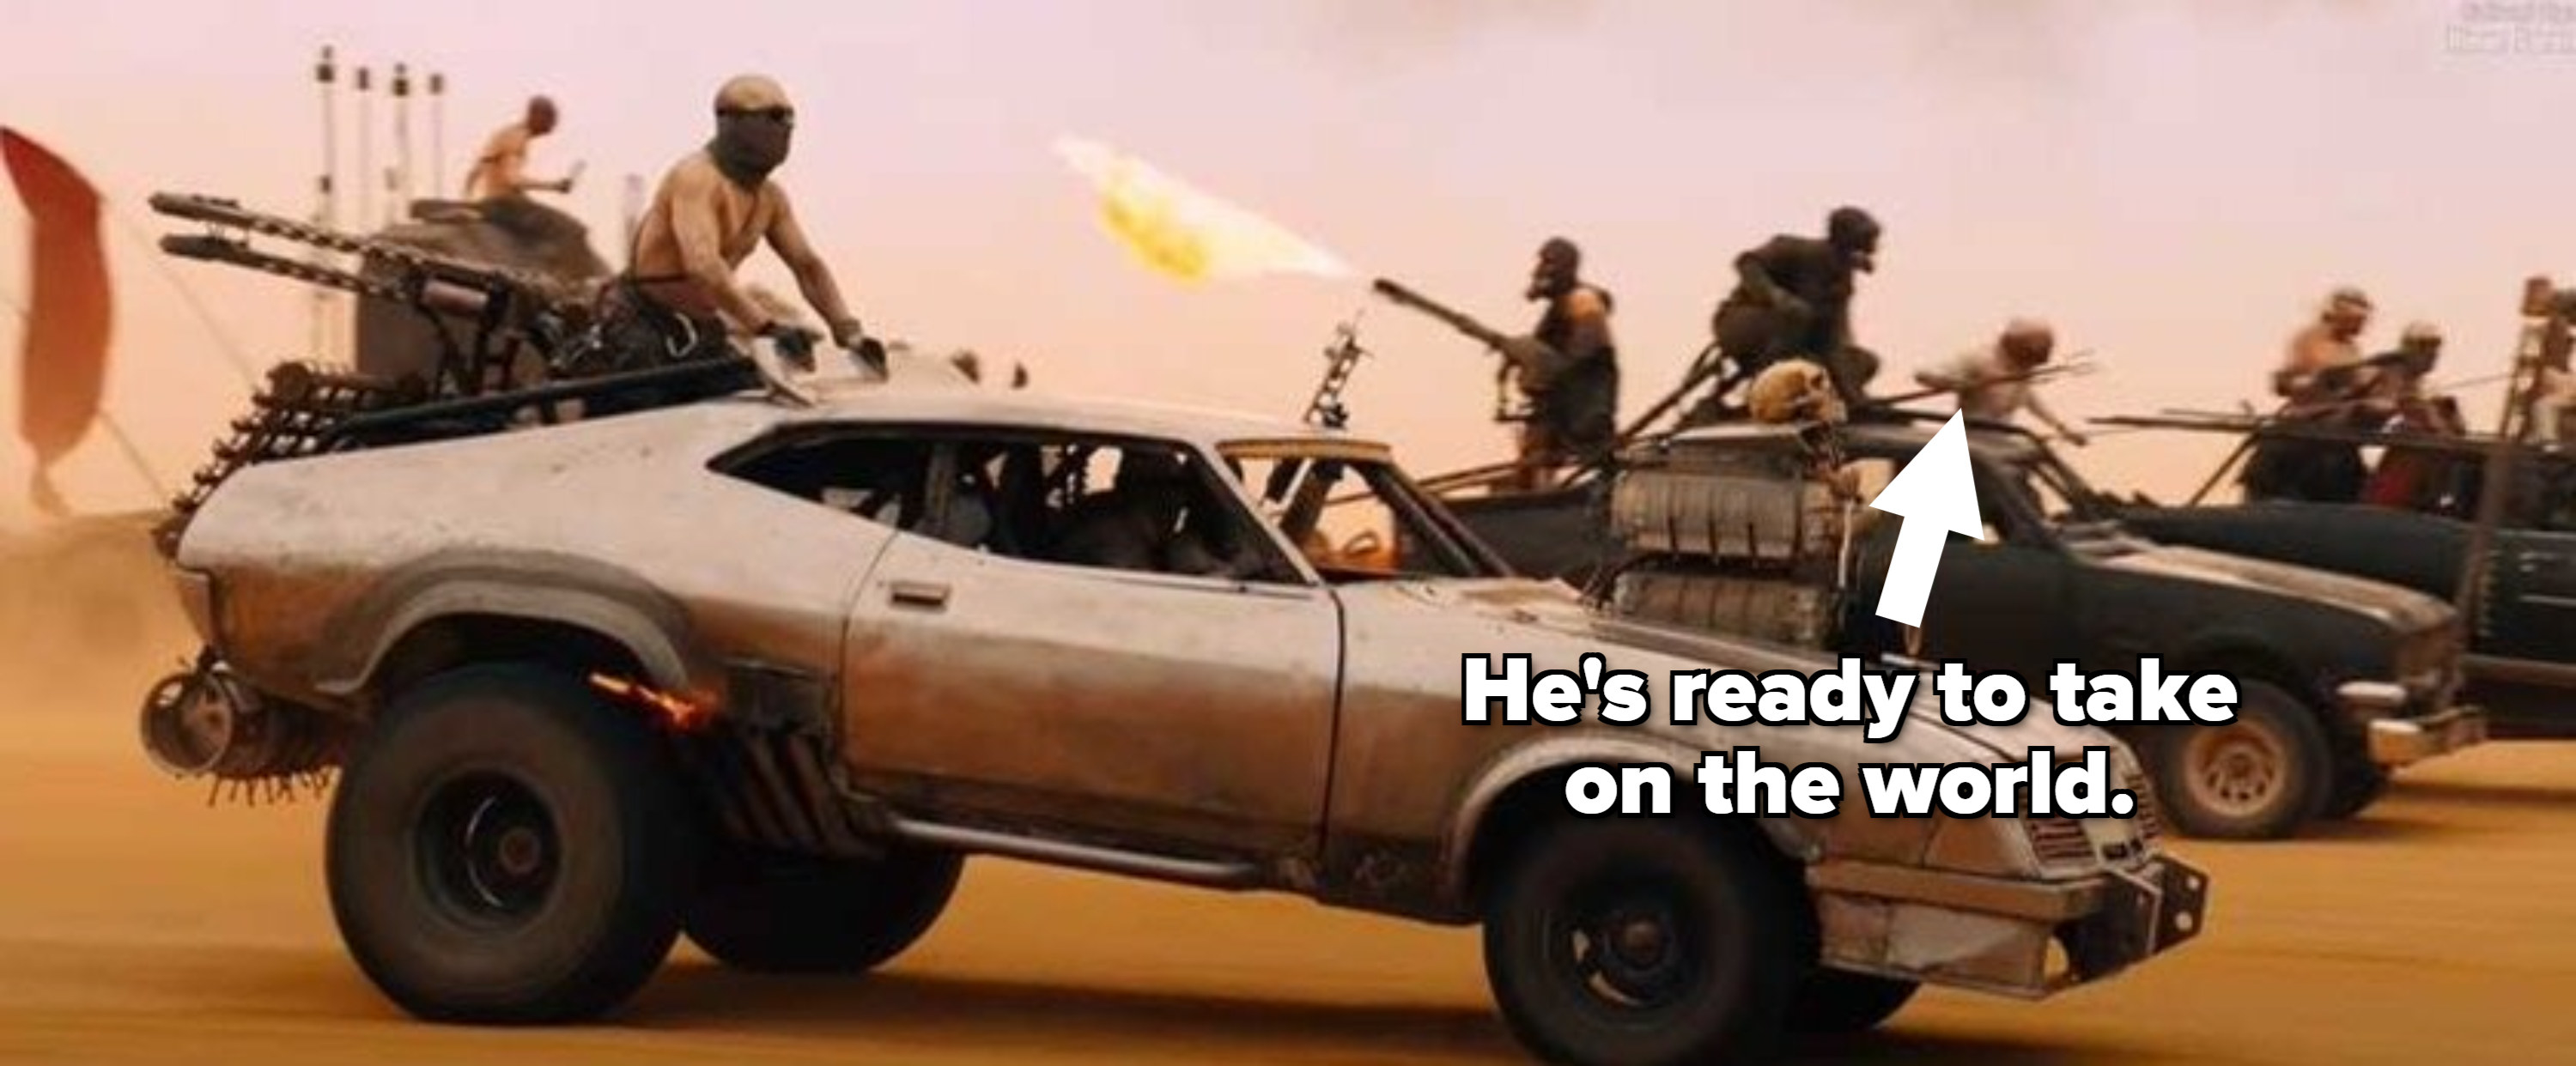 Man holding trident while hanging out of a fast-moving car in &quot;Mad Max: Fury Road&quot;